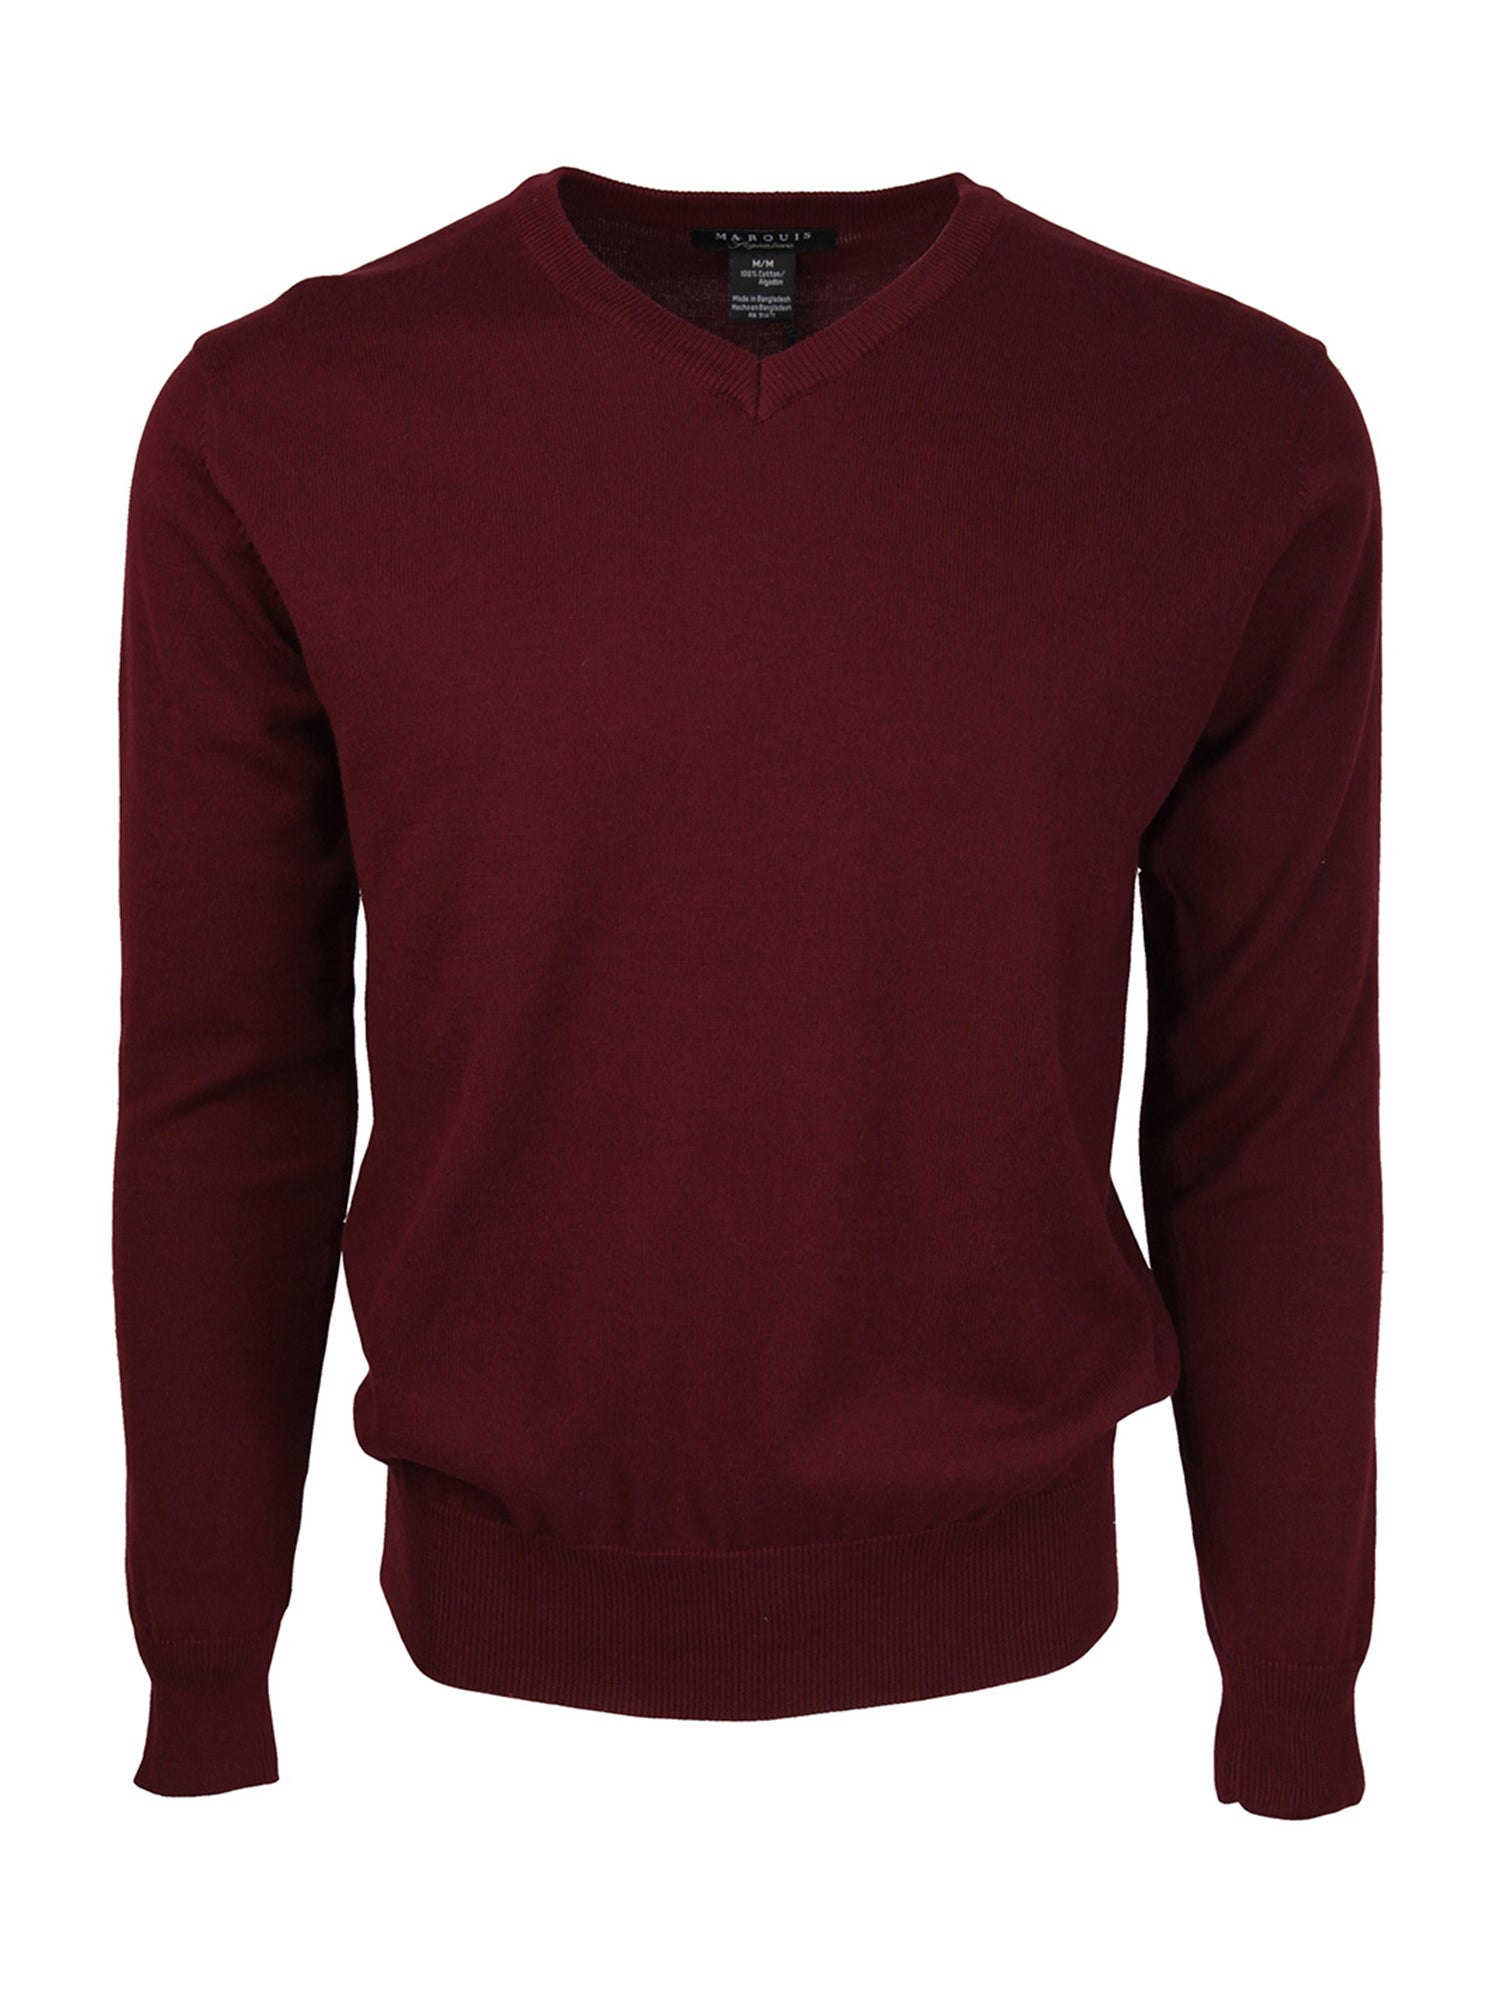 Marquis Men's Modern Fit Solid V-neck Cotton Sweater Sweater TheDapperTie Burgundy Small 